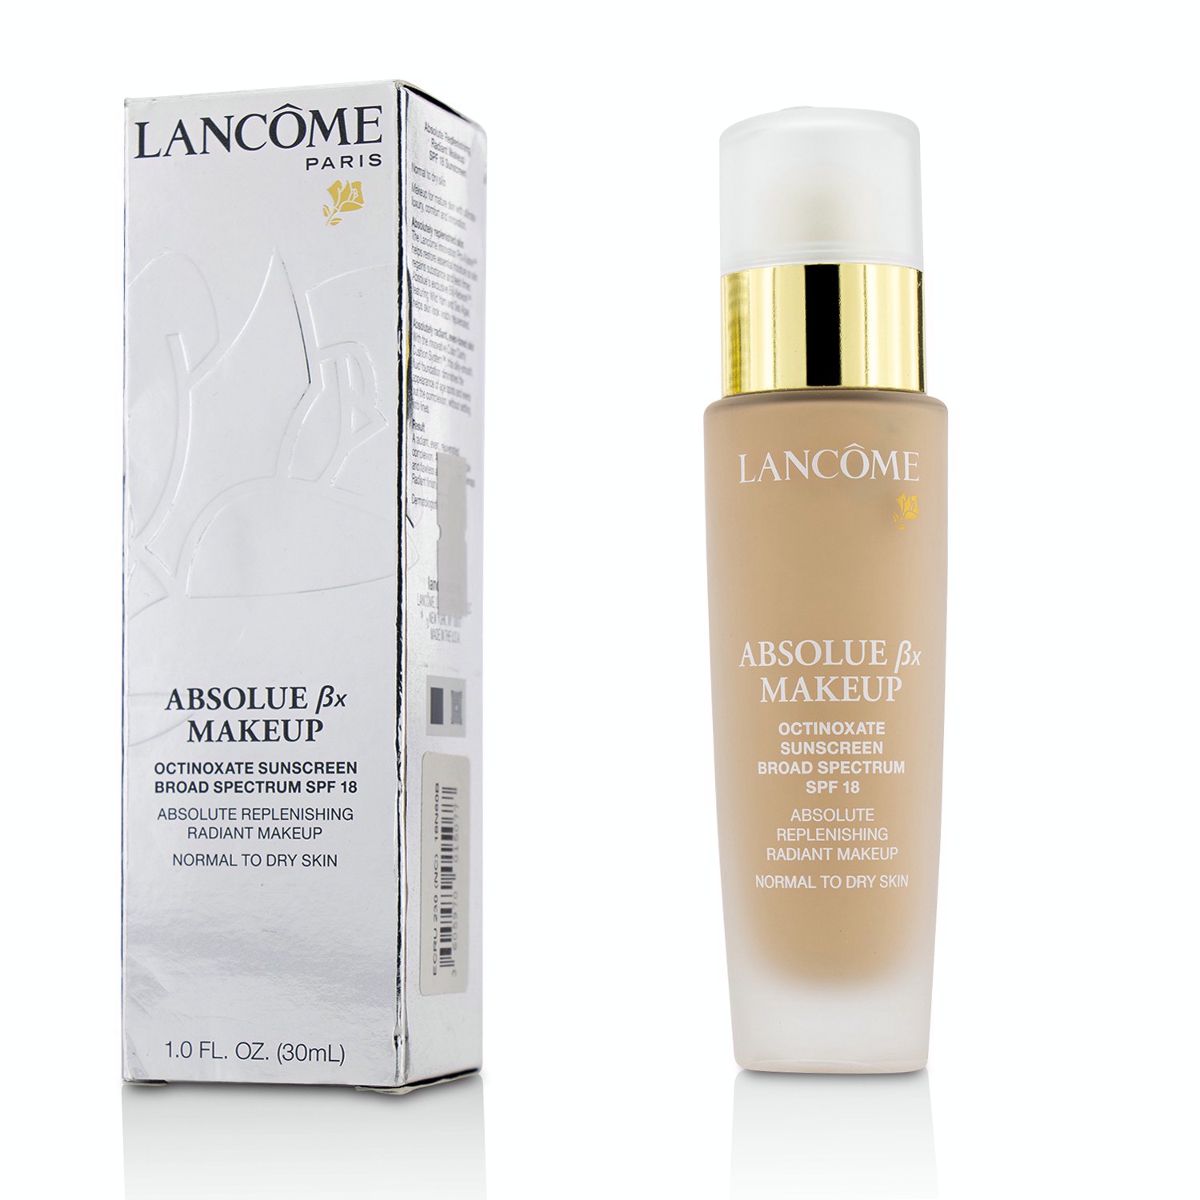 Absolue Bx Absolute Replenishing Radiant Makeup SPF 18 - # Absolute Ecru 230 NC (US Version) Lancome Image